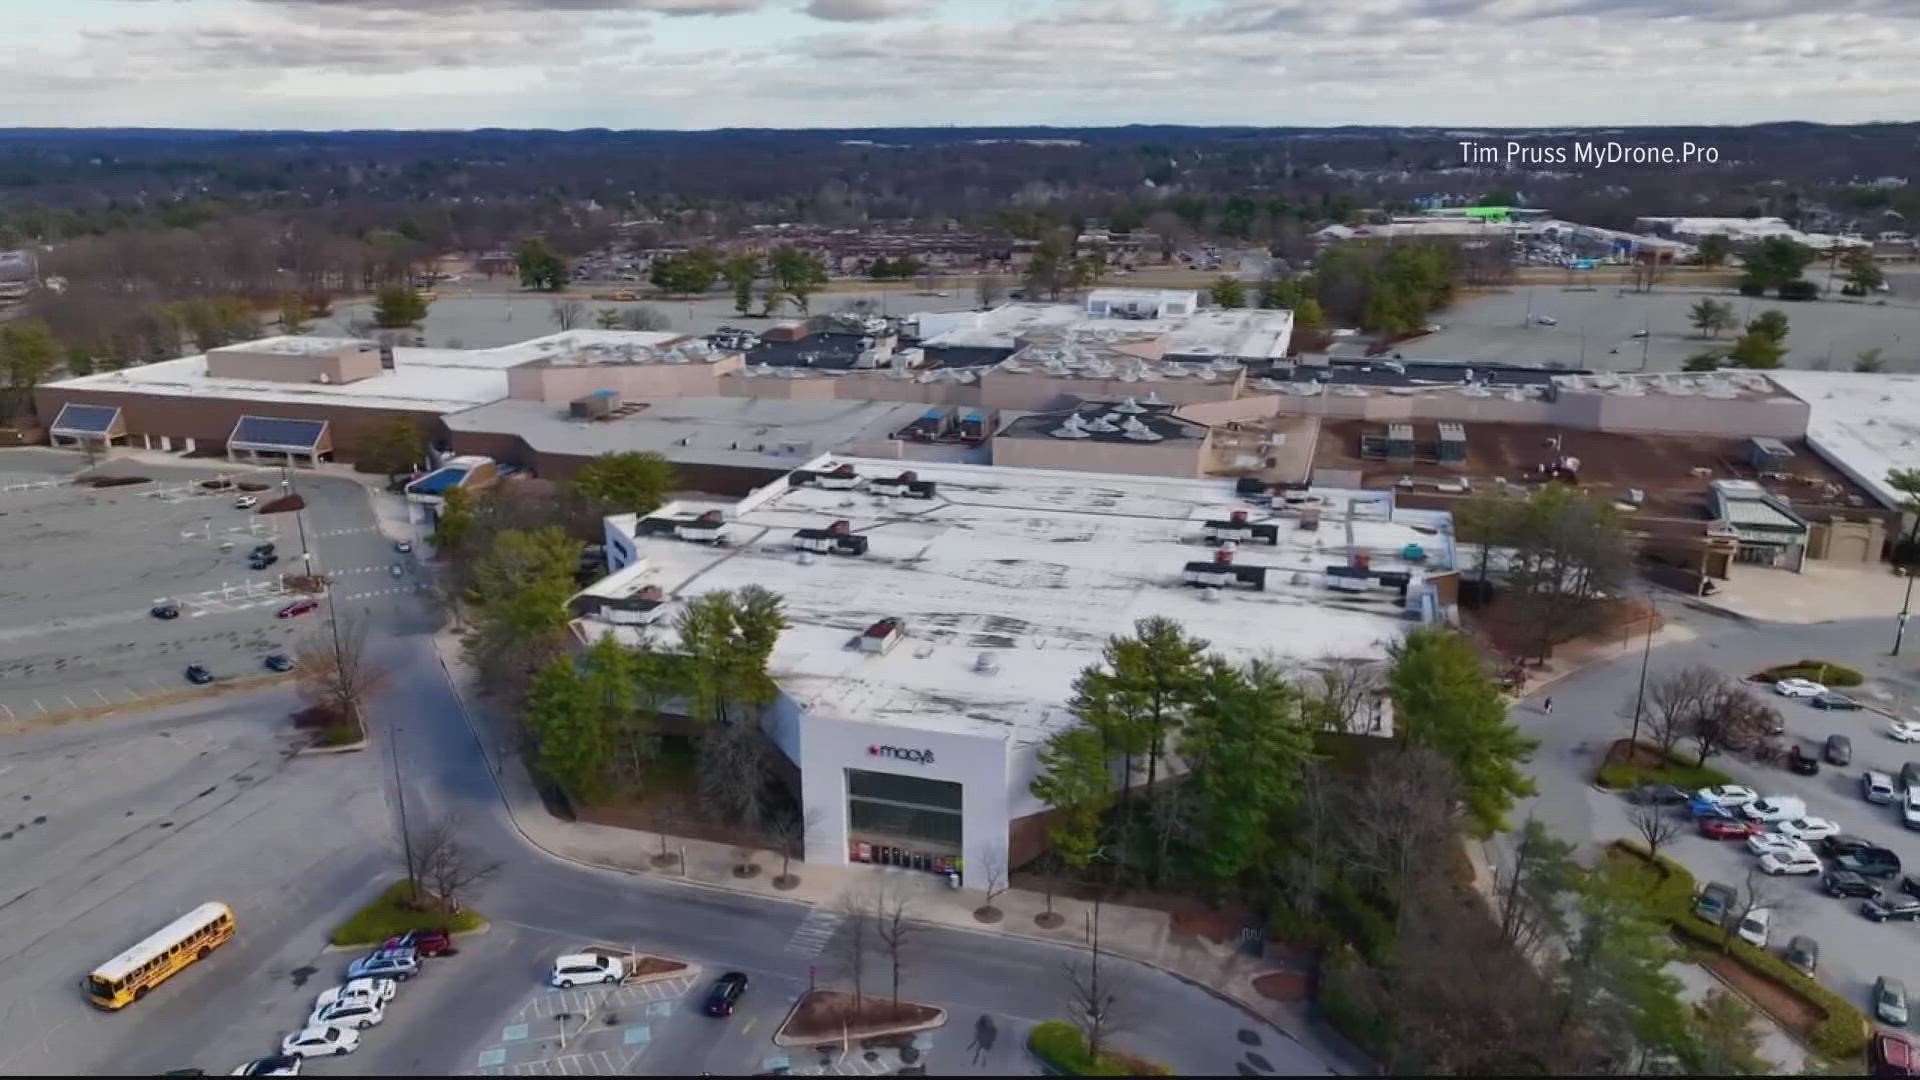 City leaders and developers say what will replace the mall will help build a better future for Gaithersburg.